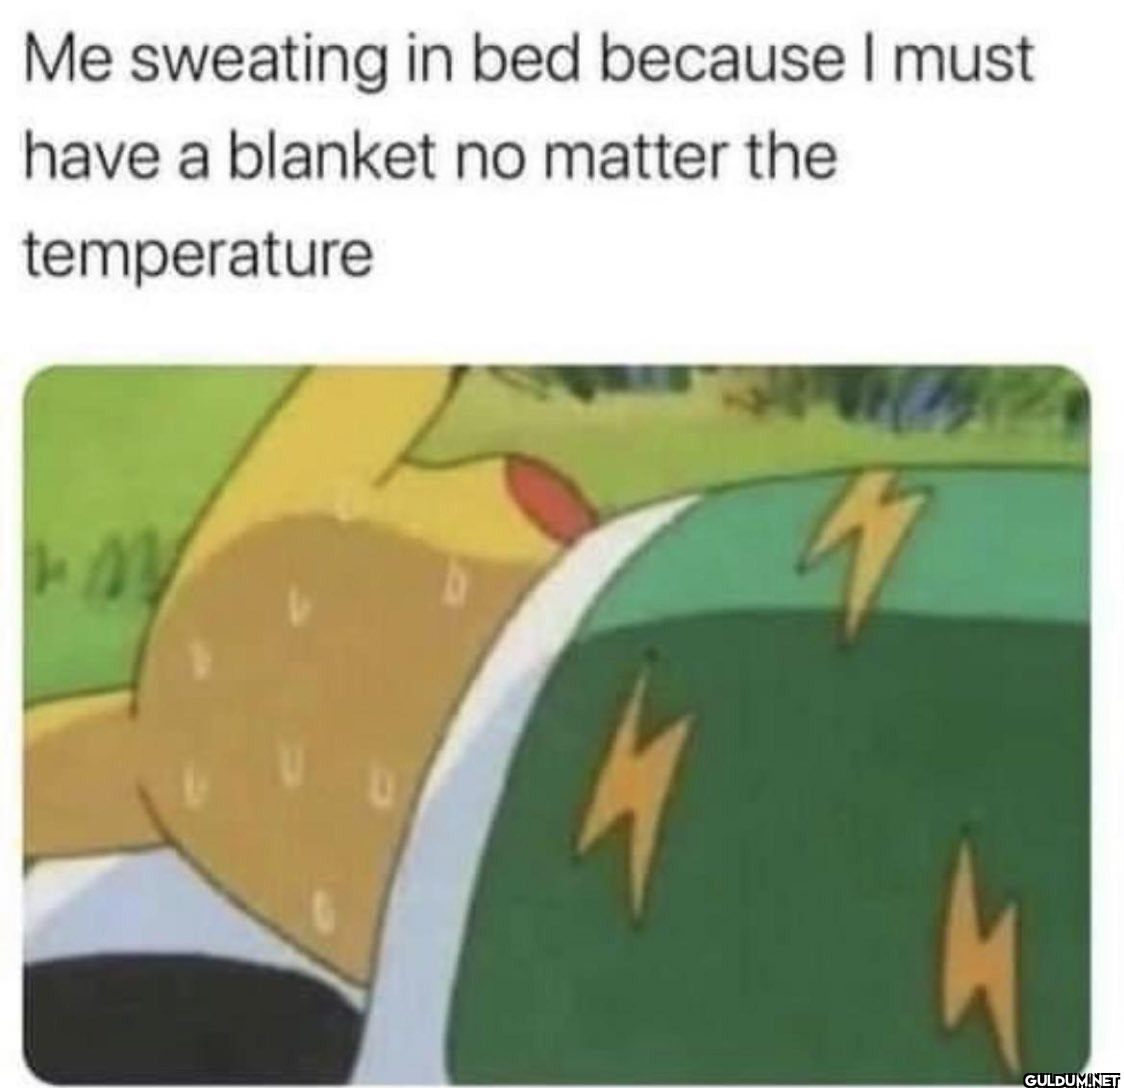 Me sweating in bed because...